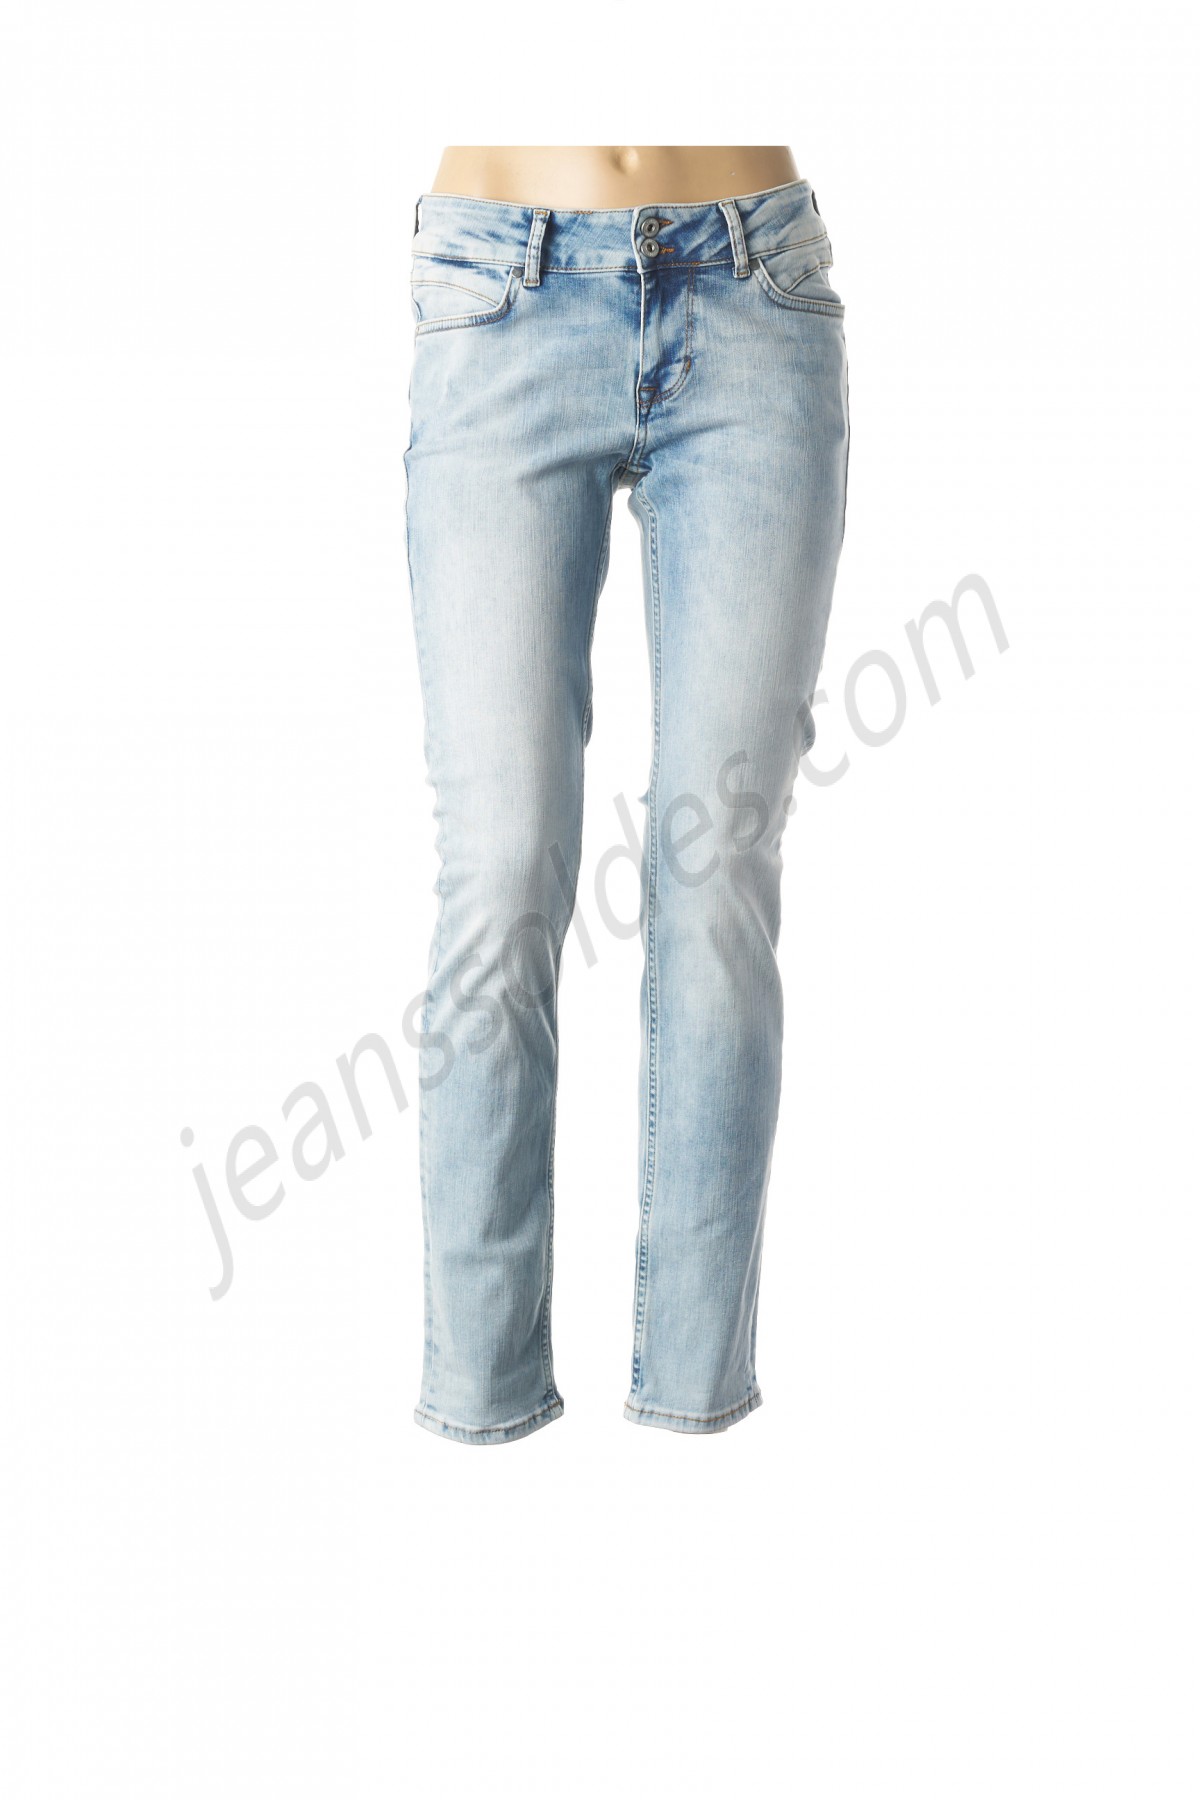 mustang-Jeans coupe slim prix d’amis - -0